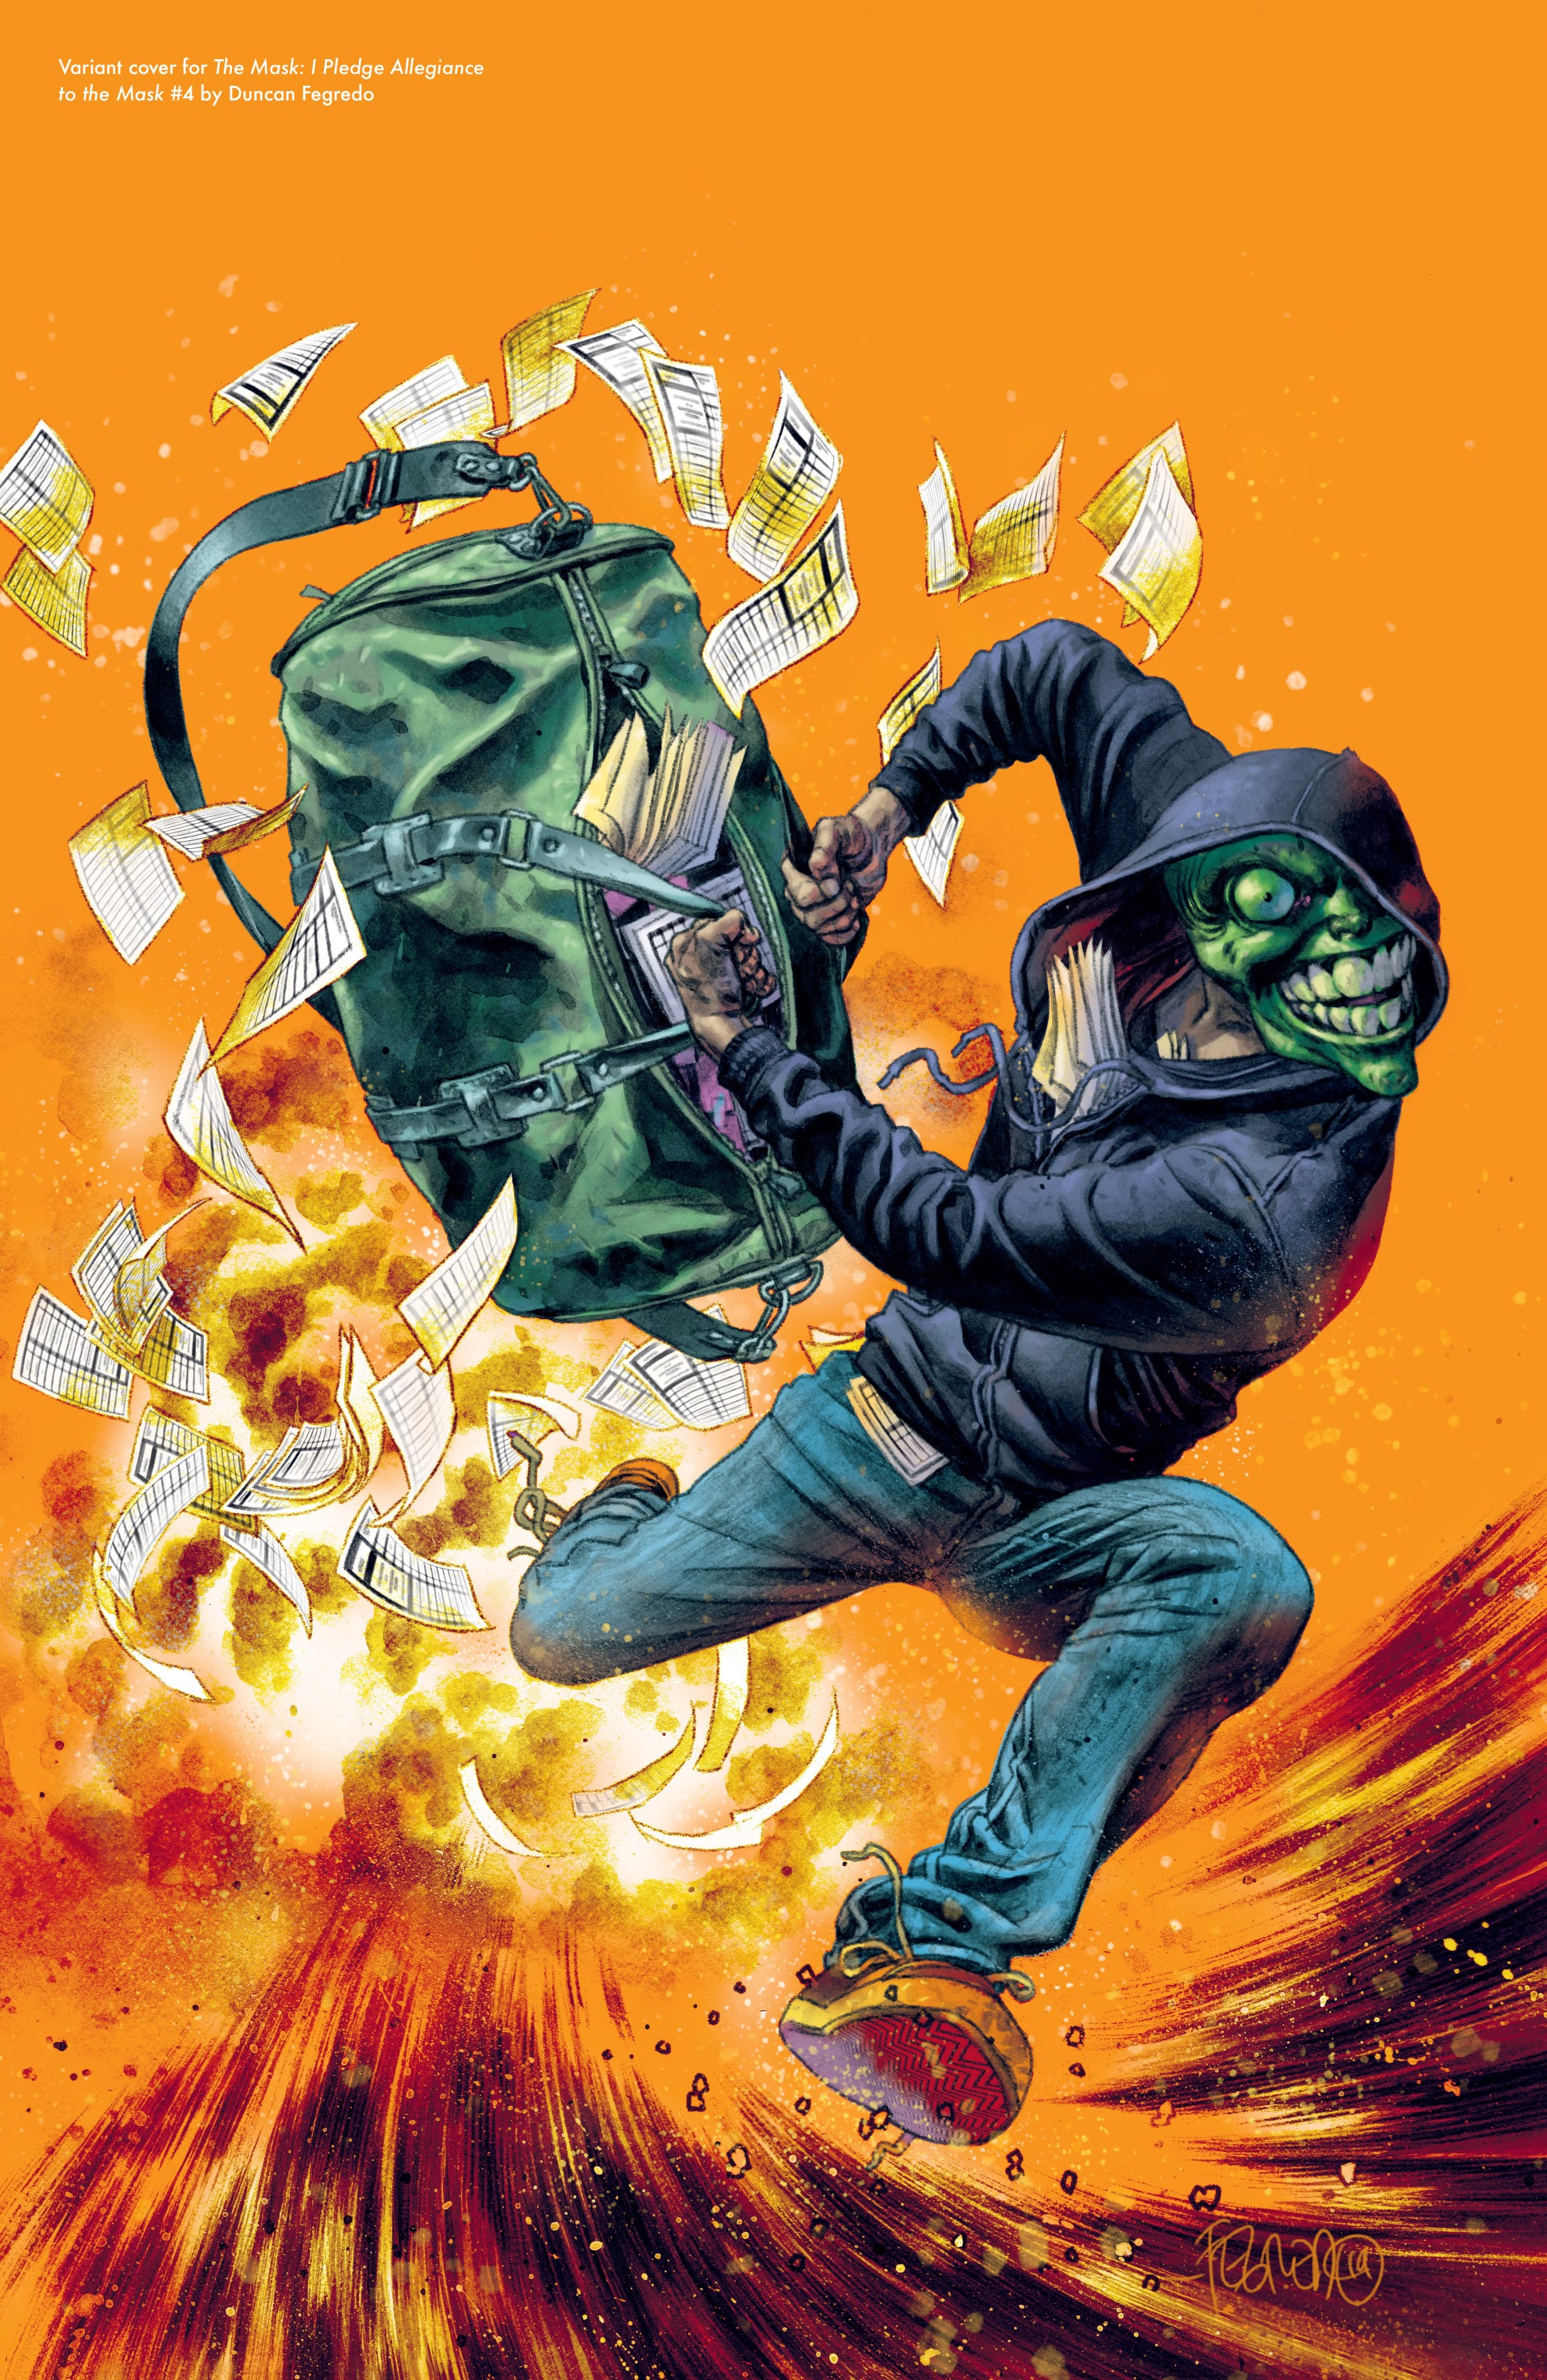 Read online The Mask: I Pledge Allegiance to the Mask comic -  Issue # _TPB - 97